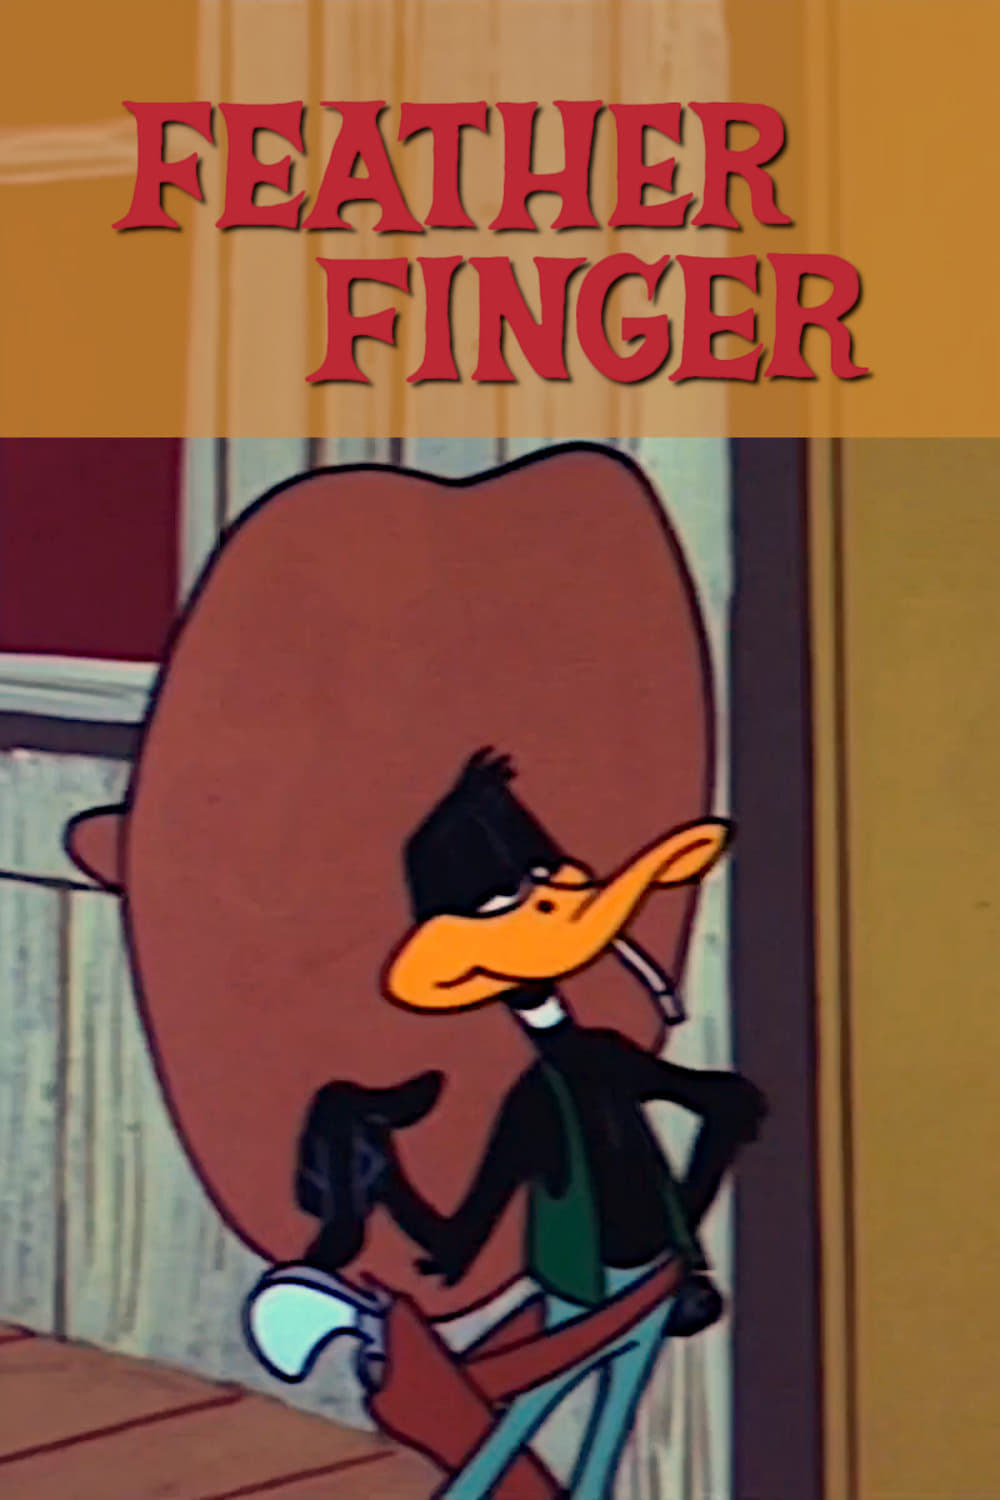 Feather Finger (1966)